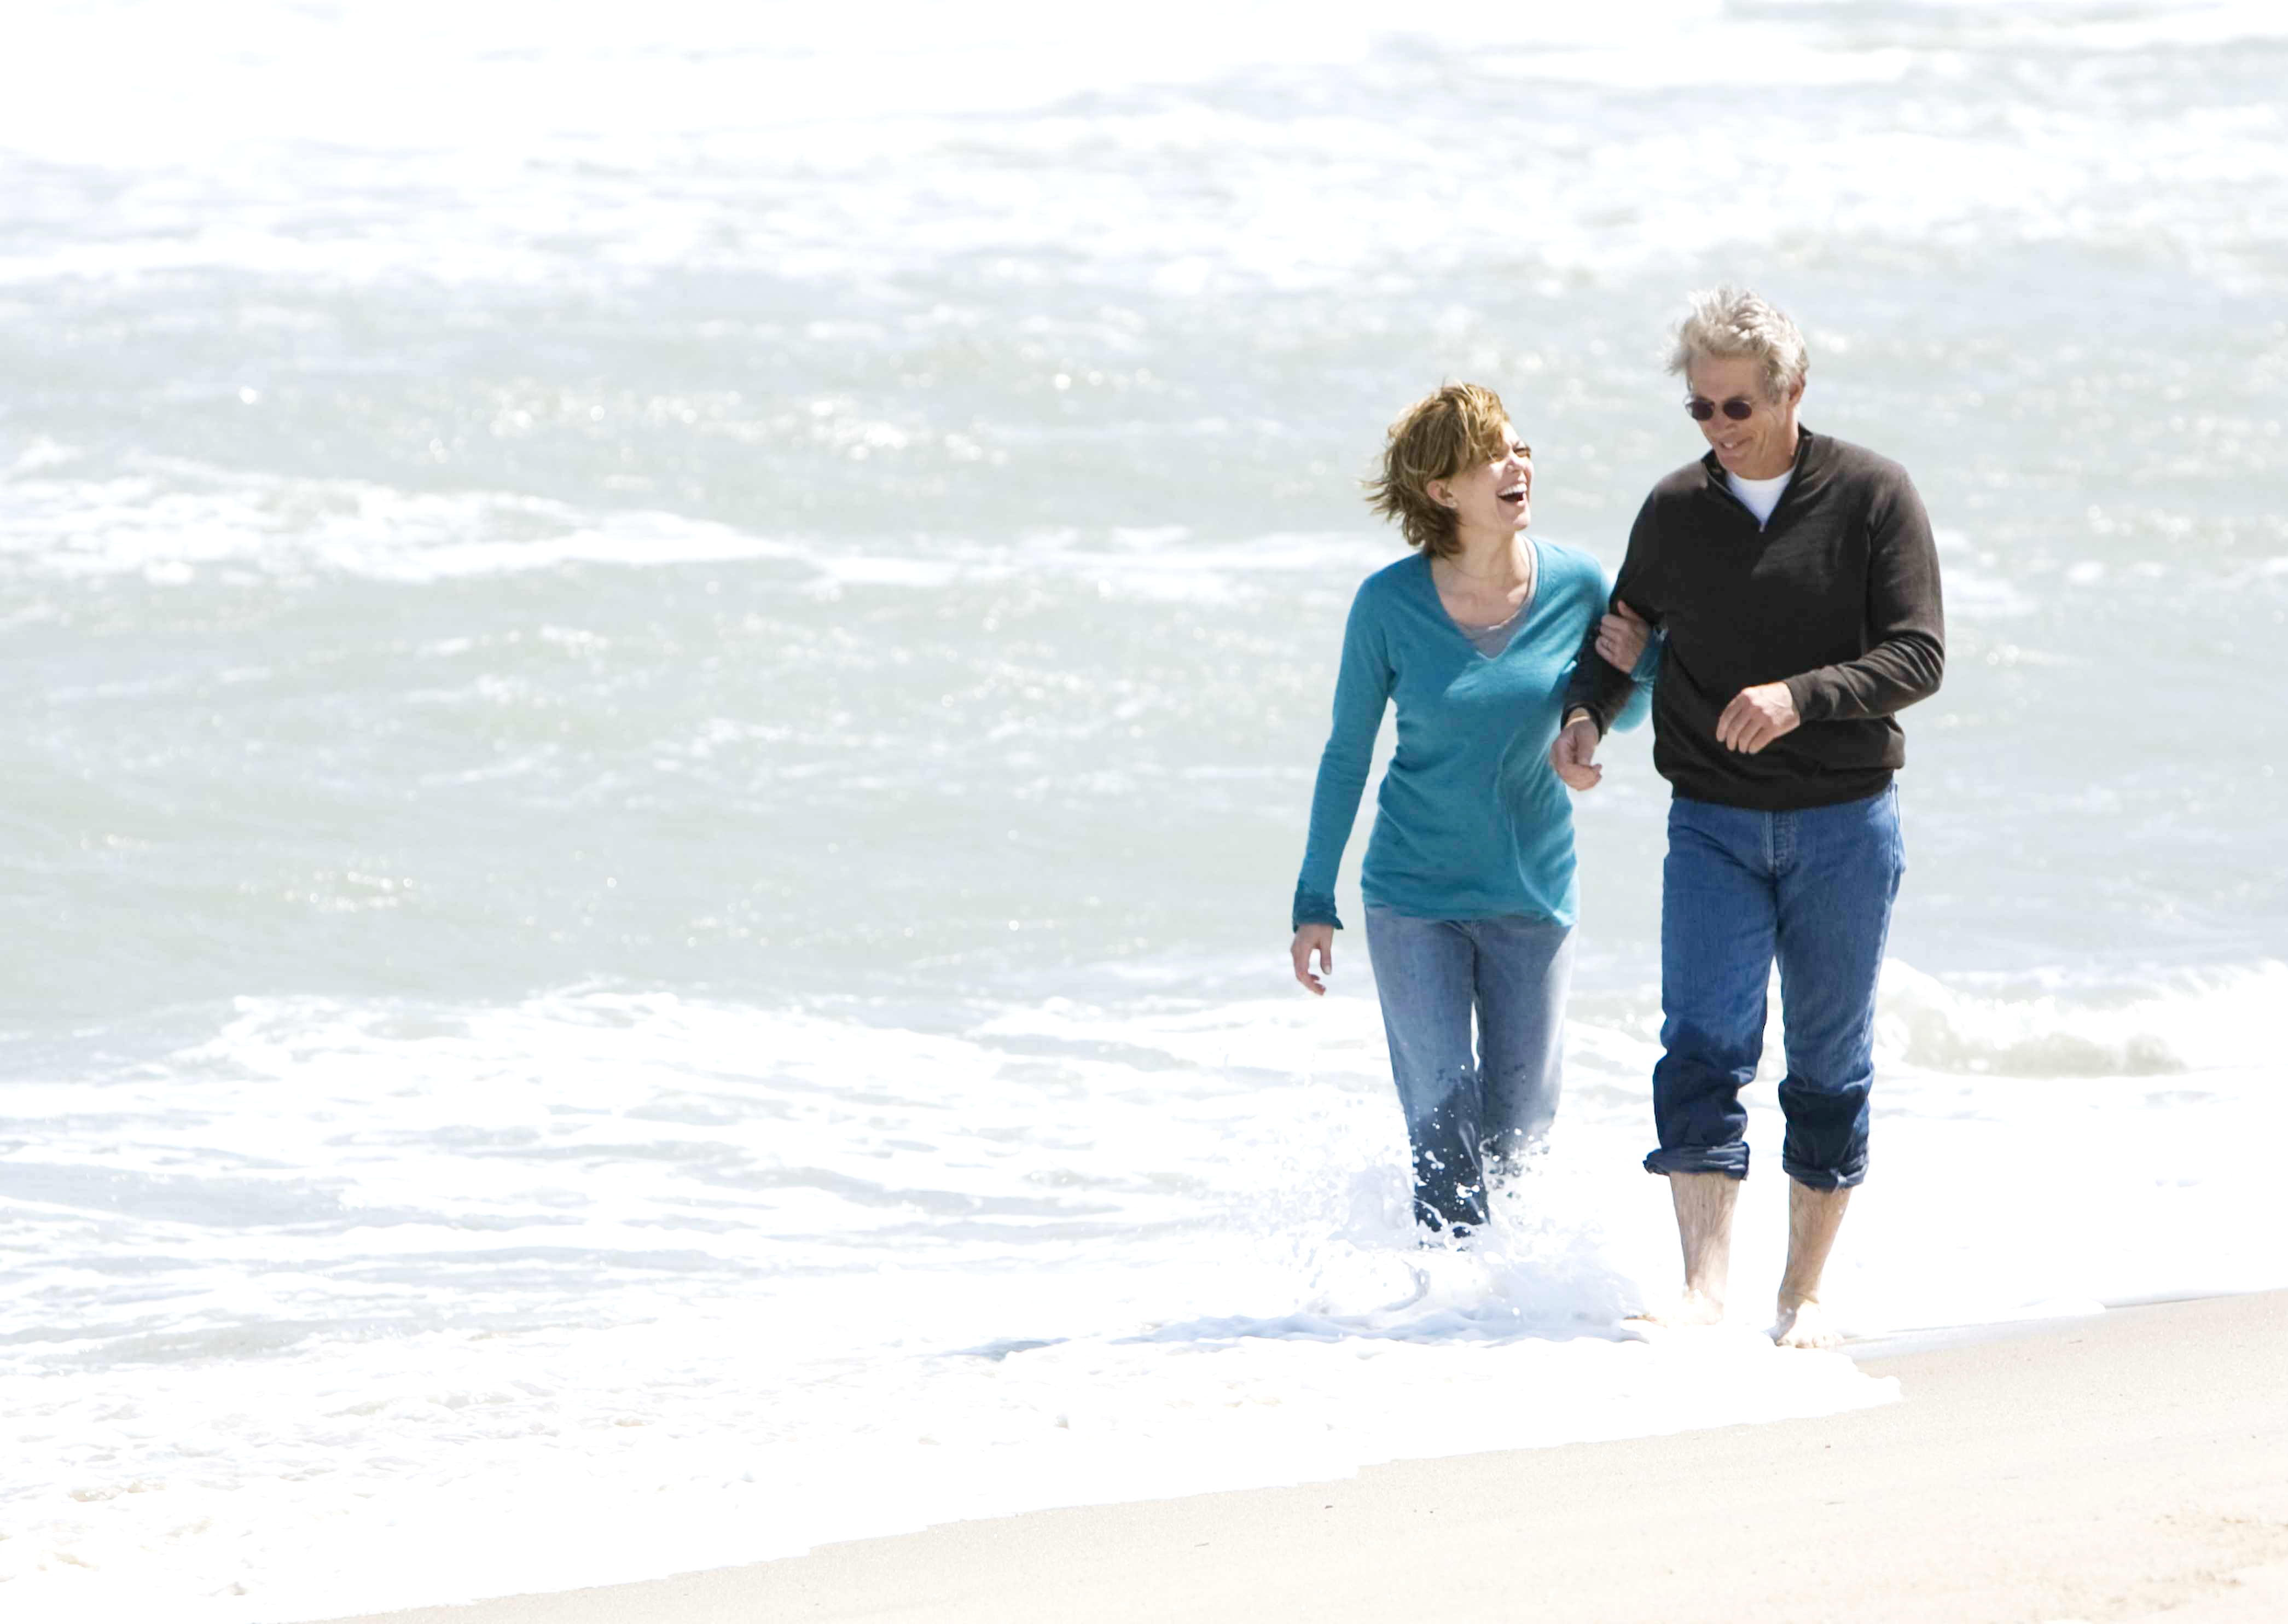 Diane Lane stars as Adrienne Willis and Richard Gere stars as Dr. Paul Flanner in Warner Bros. Pictures' Nights in Rodanthe (2008). Photo credit by Michael Tackett.